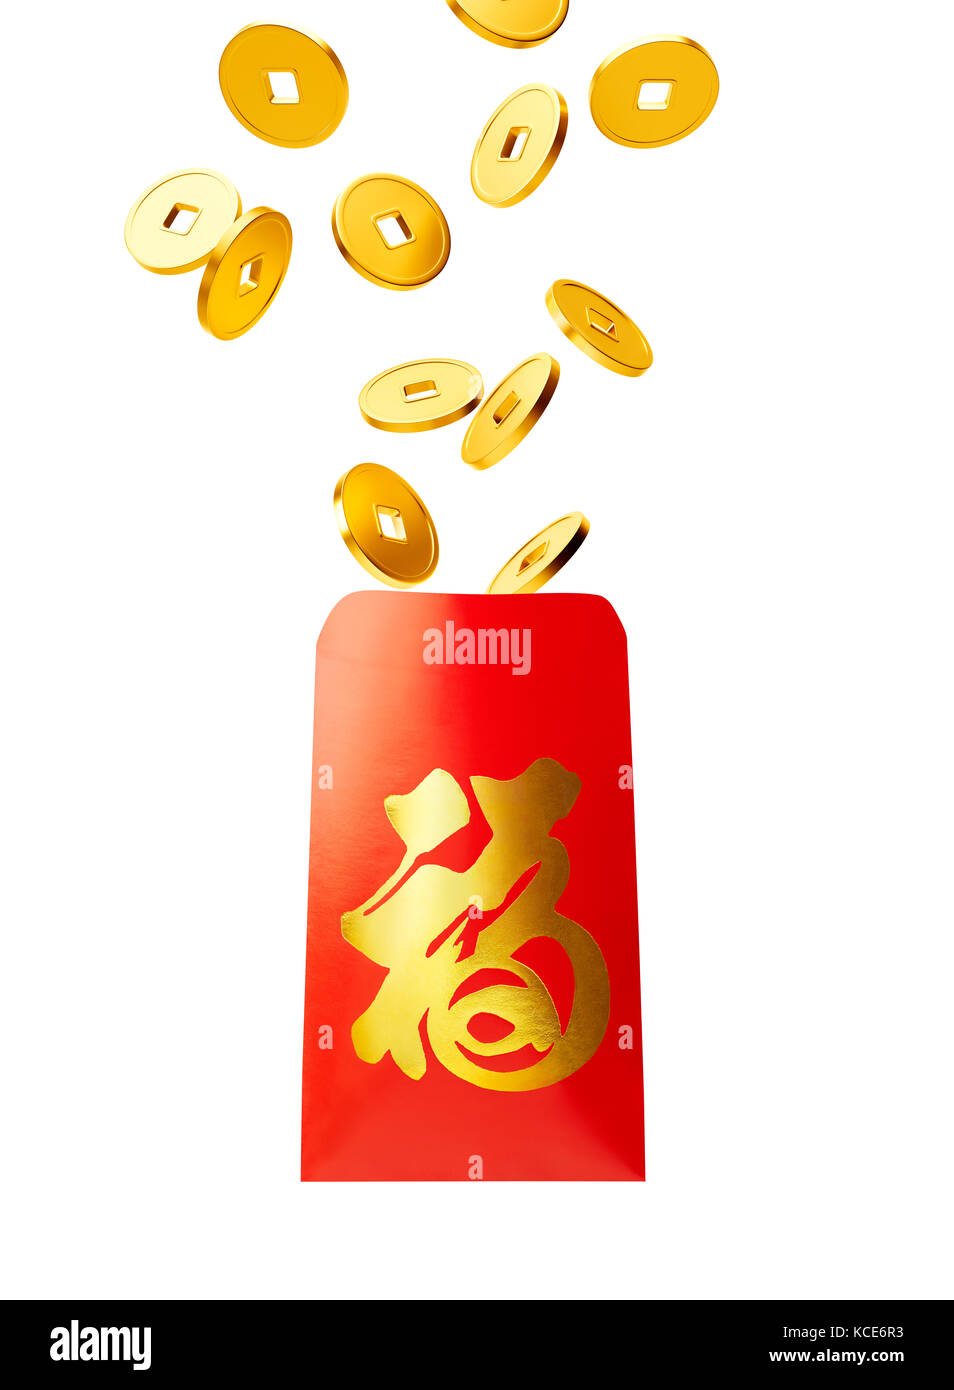 Red packet with gold coins isolated on white, Chinese calligraphy 'FU' (Foreign text means Prosperity) Stock Photo